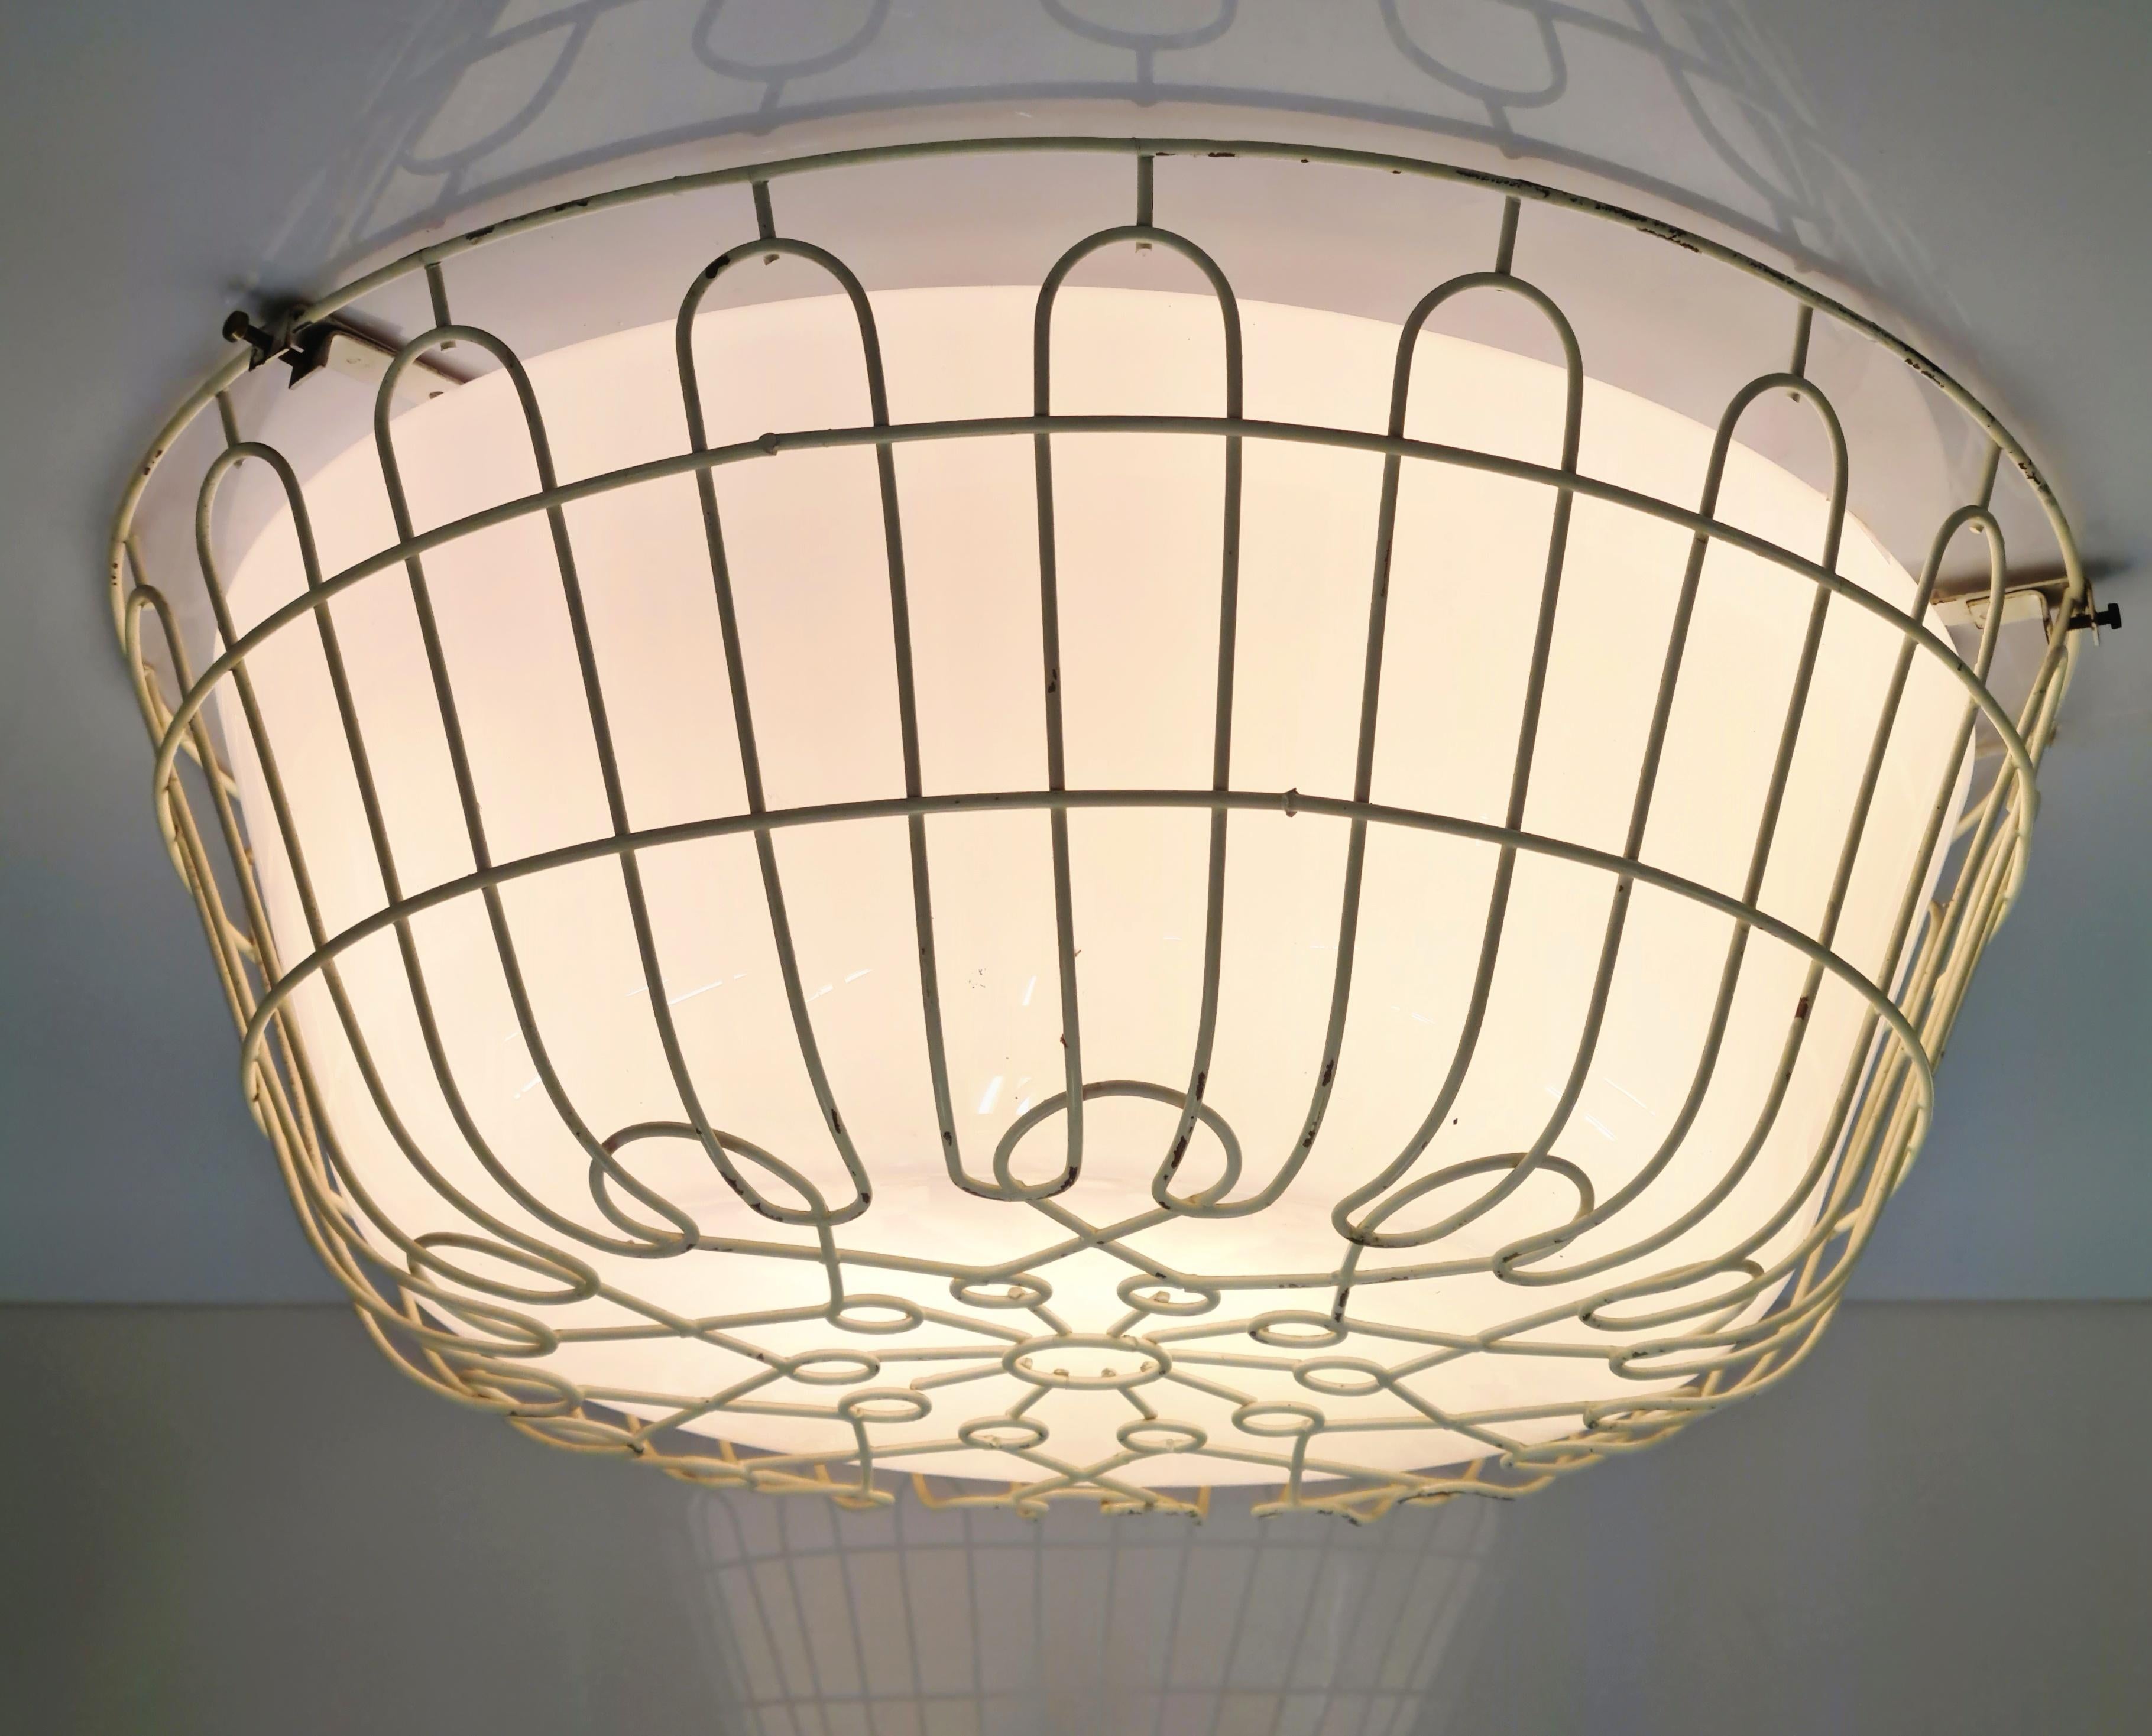 A Beautiful and Lively Lisa Johansson-Papé Ceiling Lamp Model 71-115, Orno 1950s For Sale 4